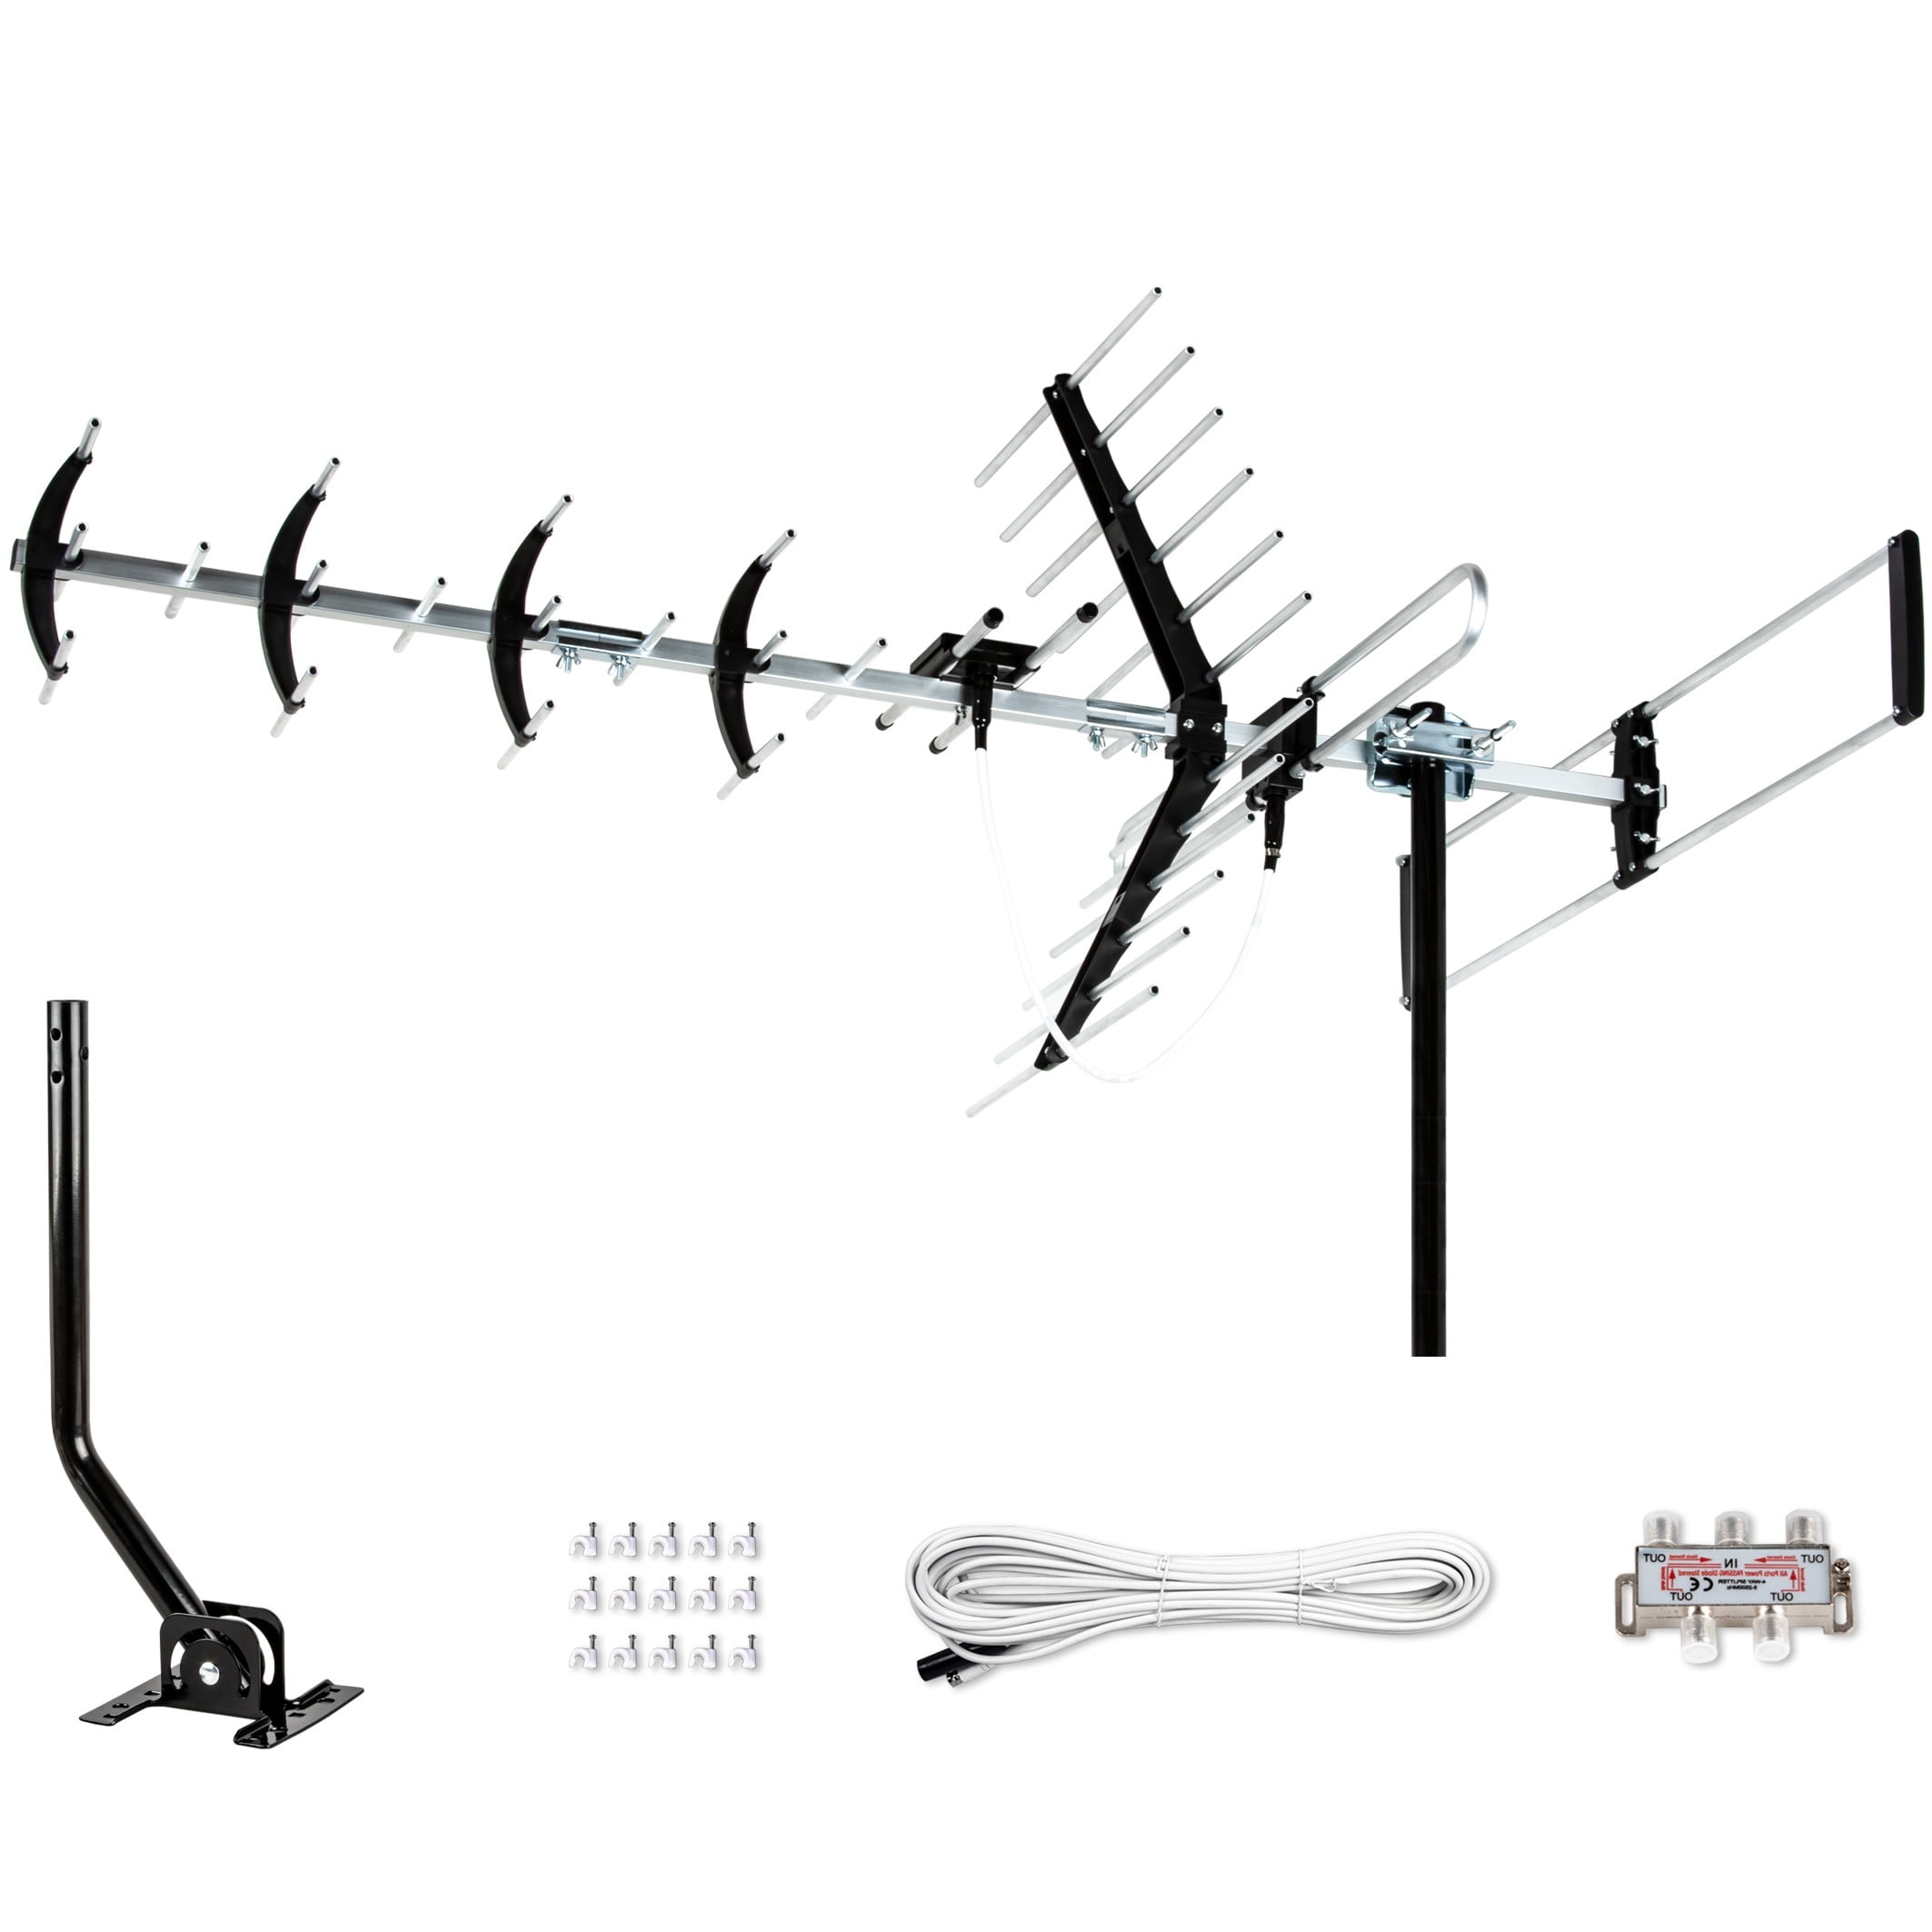 Monoprice's Outdoor HDTV Antenna drops to $20 + has an 80-mile